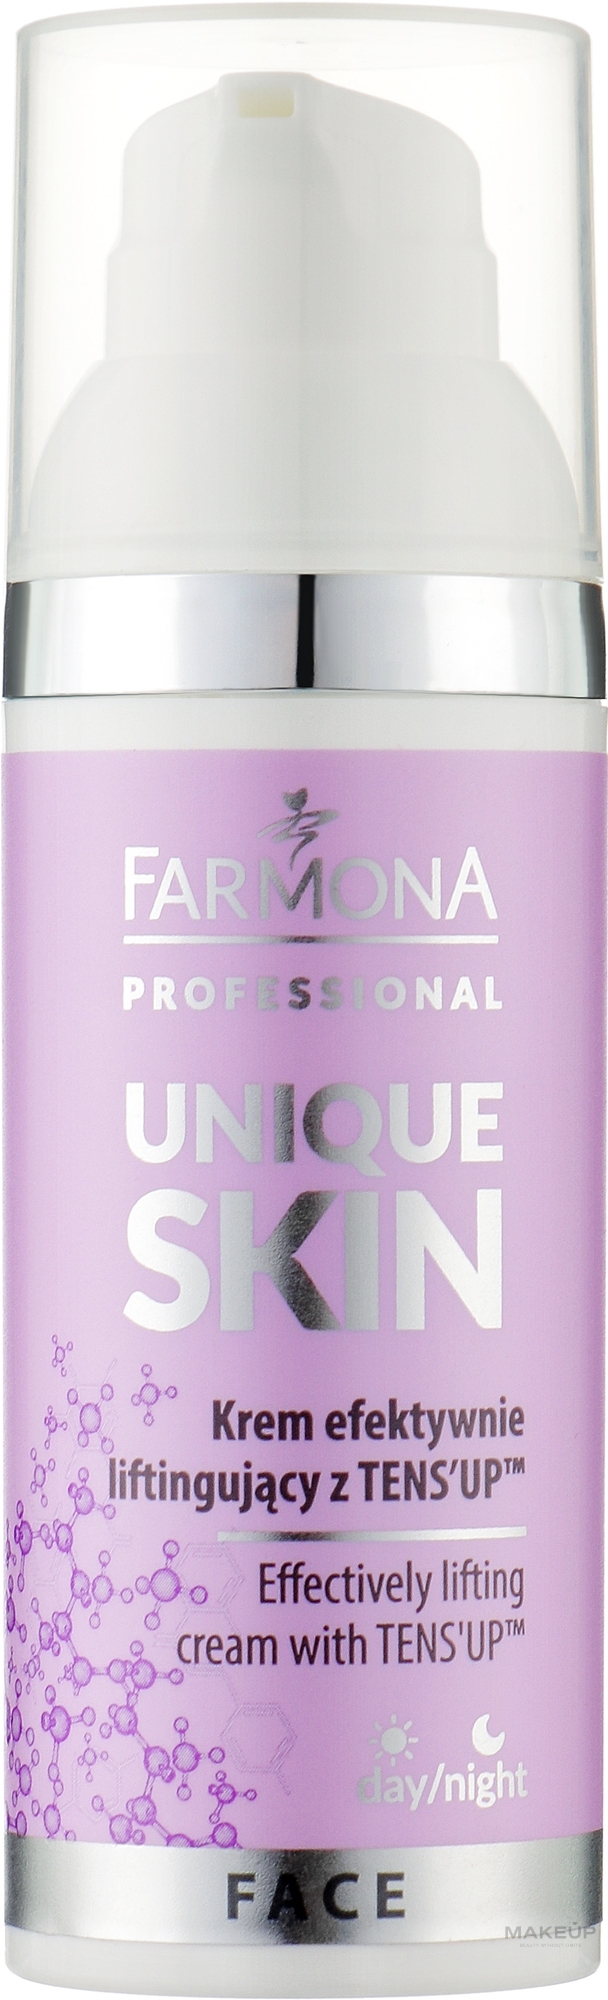 Effective Lifting Cream for All Skin Types - Farmona Professional Unique Skin Effectively Lifting Cream With TENS'UP — photo 50 ml